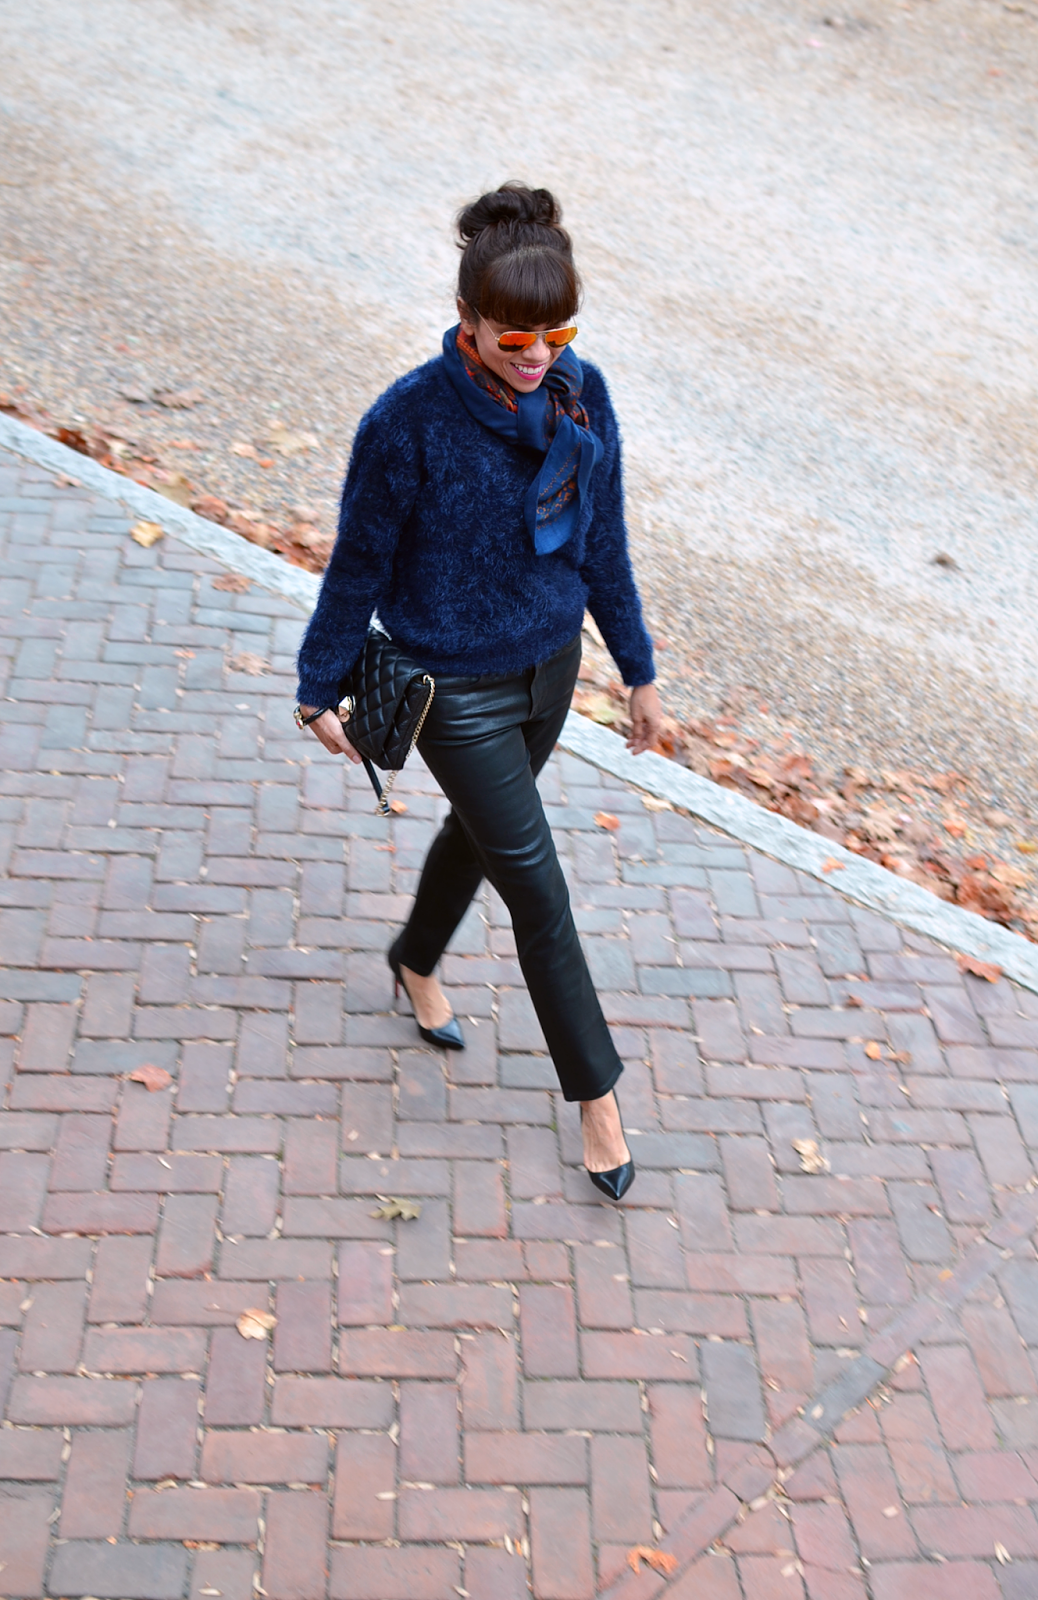 Black and blue street style 